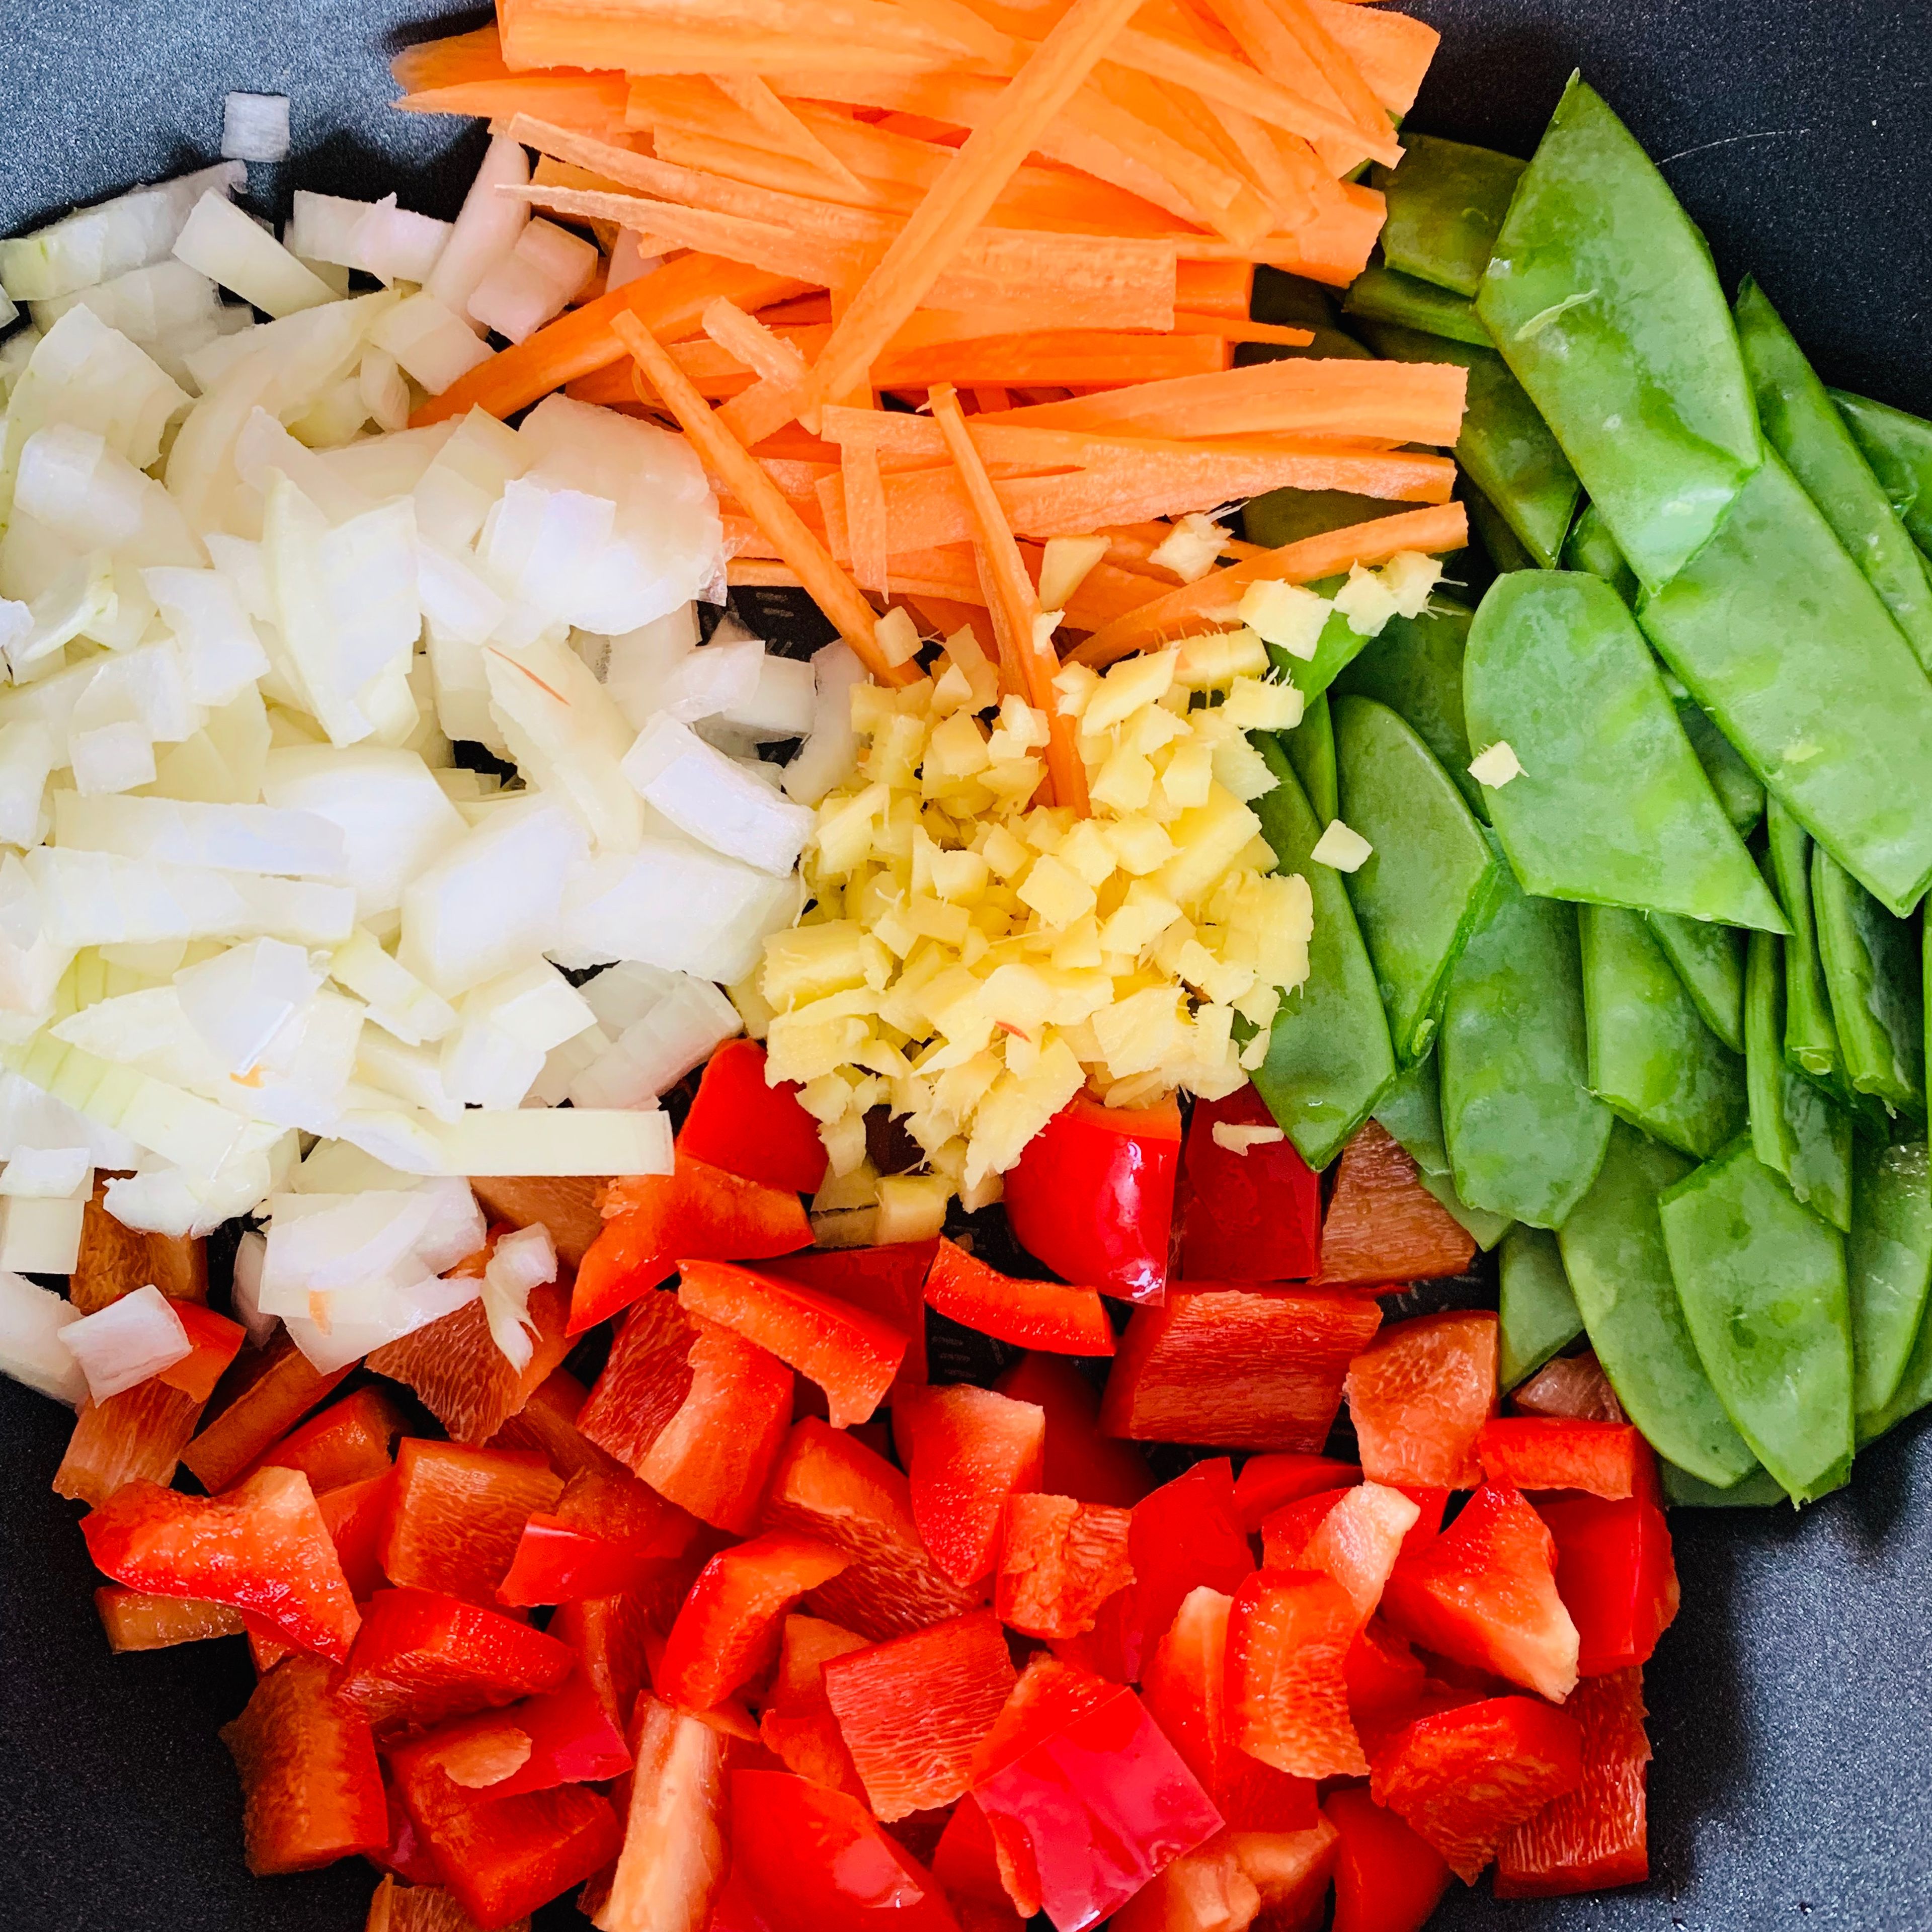 Cut the ginger, onion and pepper in dices. Half the mangetouts and cut the carrots in strips. Cut the chicken breast in chunks. 